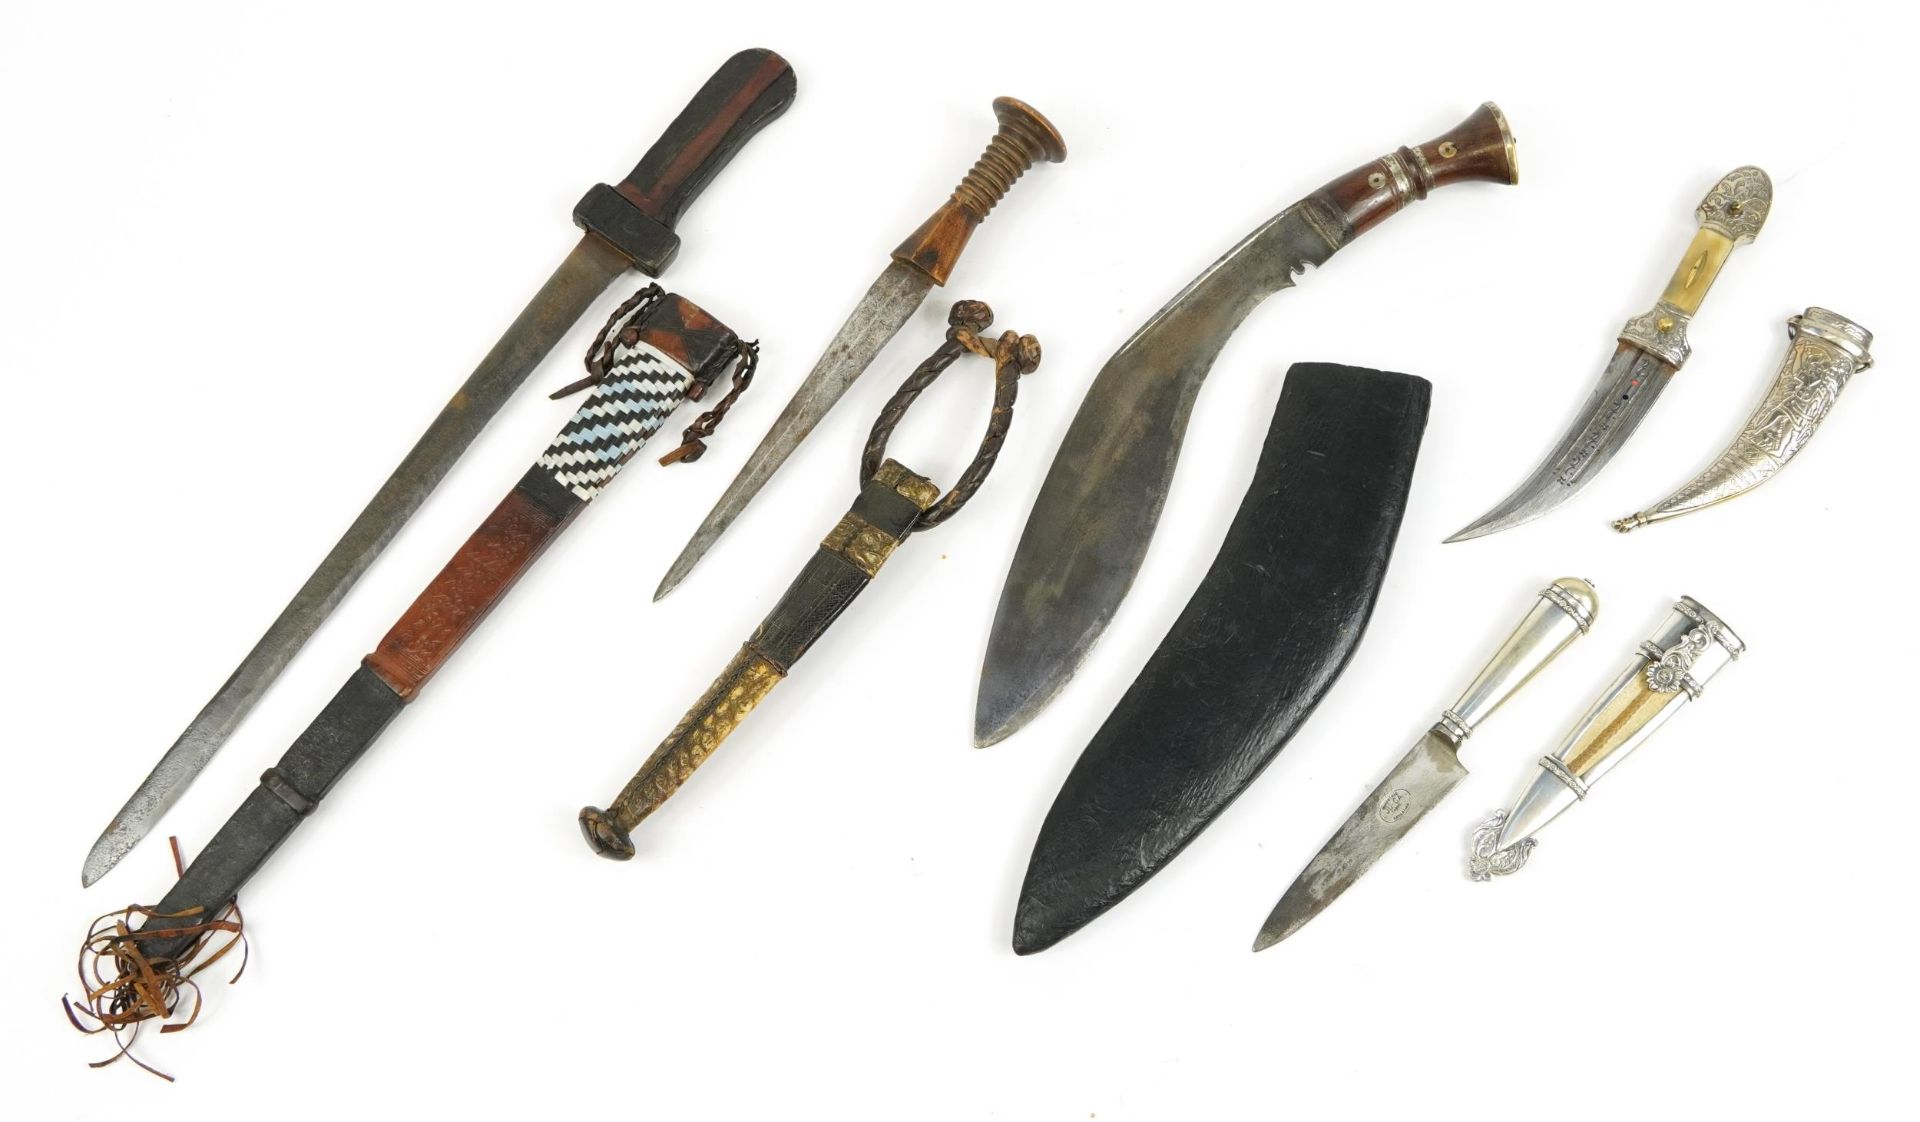 Five Middle Eastern knives and daggers with sheaths including one with crocodile skin sheath, one